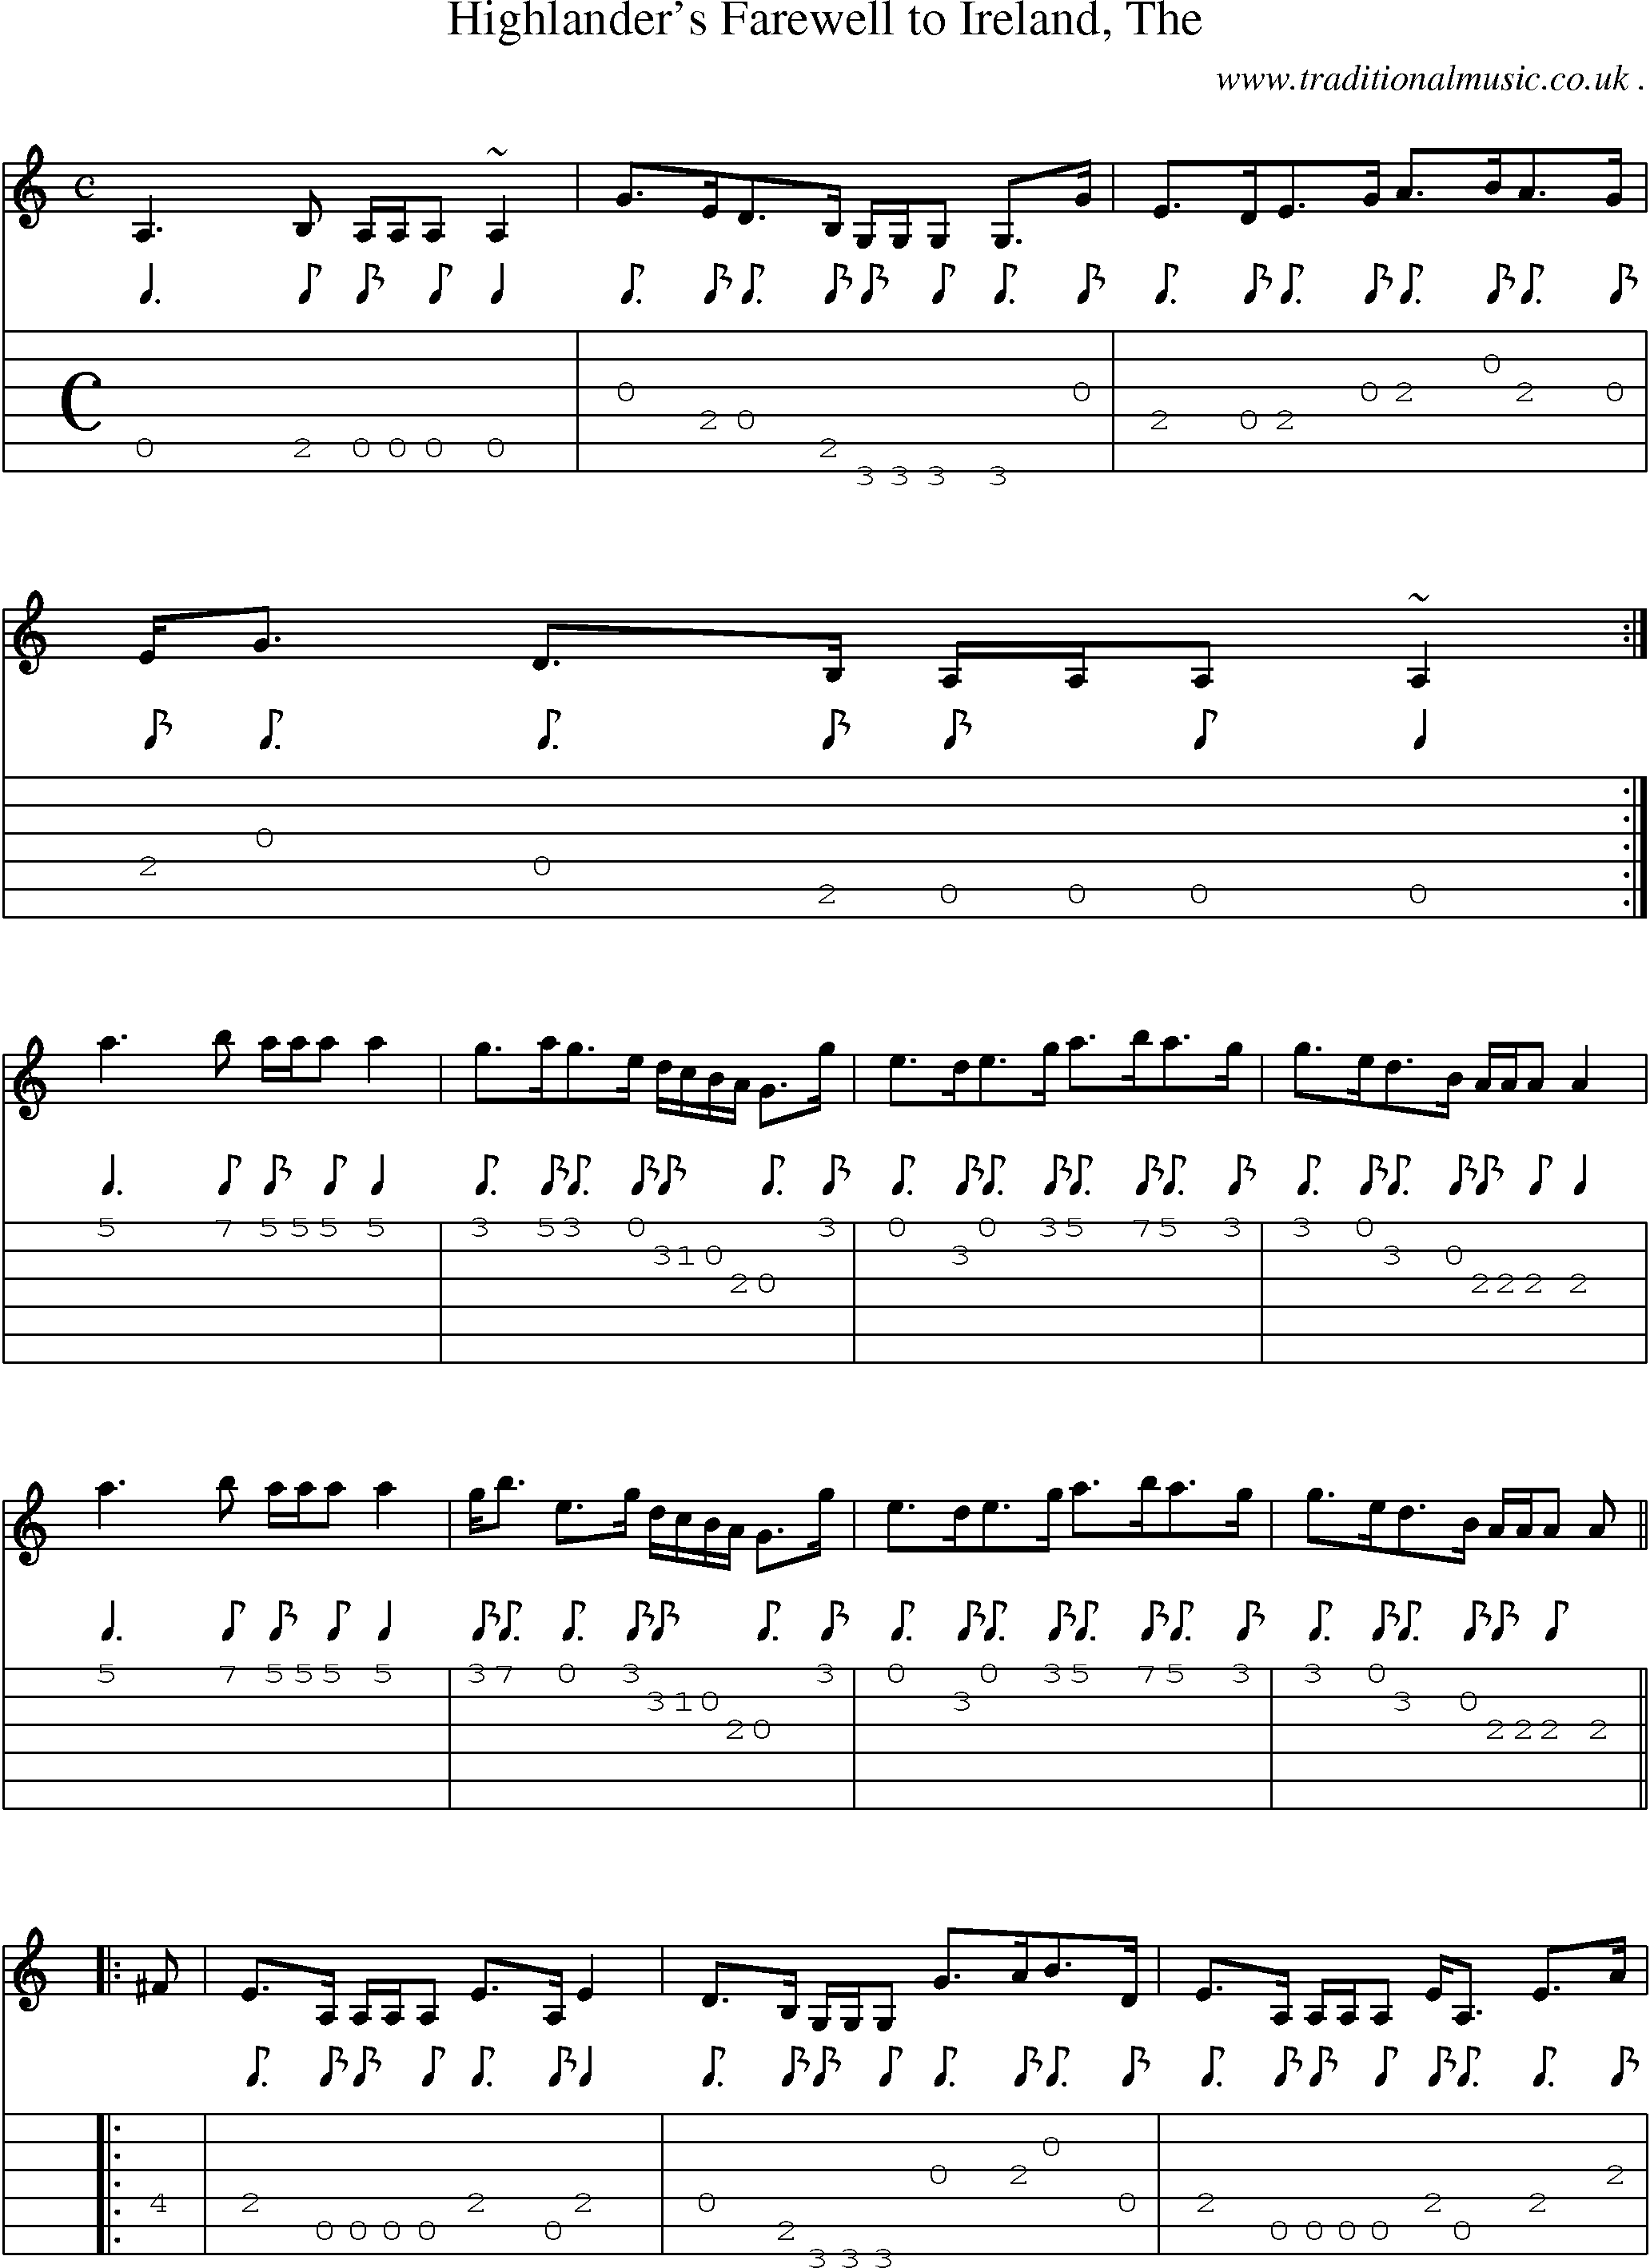 Sheet-music  score, Chords and Guitar Tabs for Highlanders Farewell To Ireland1